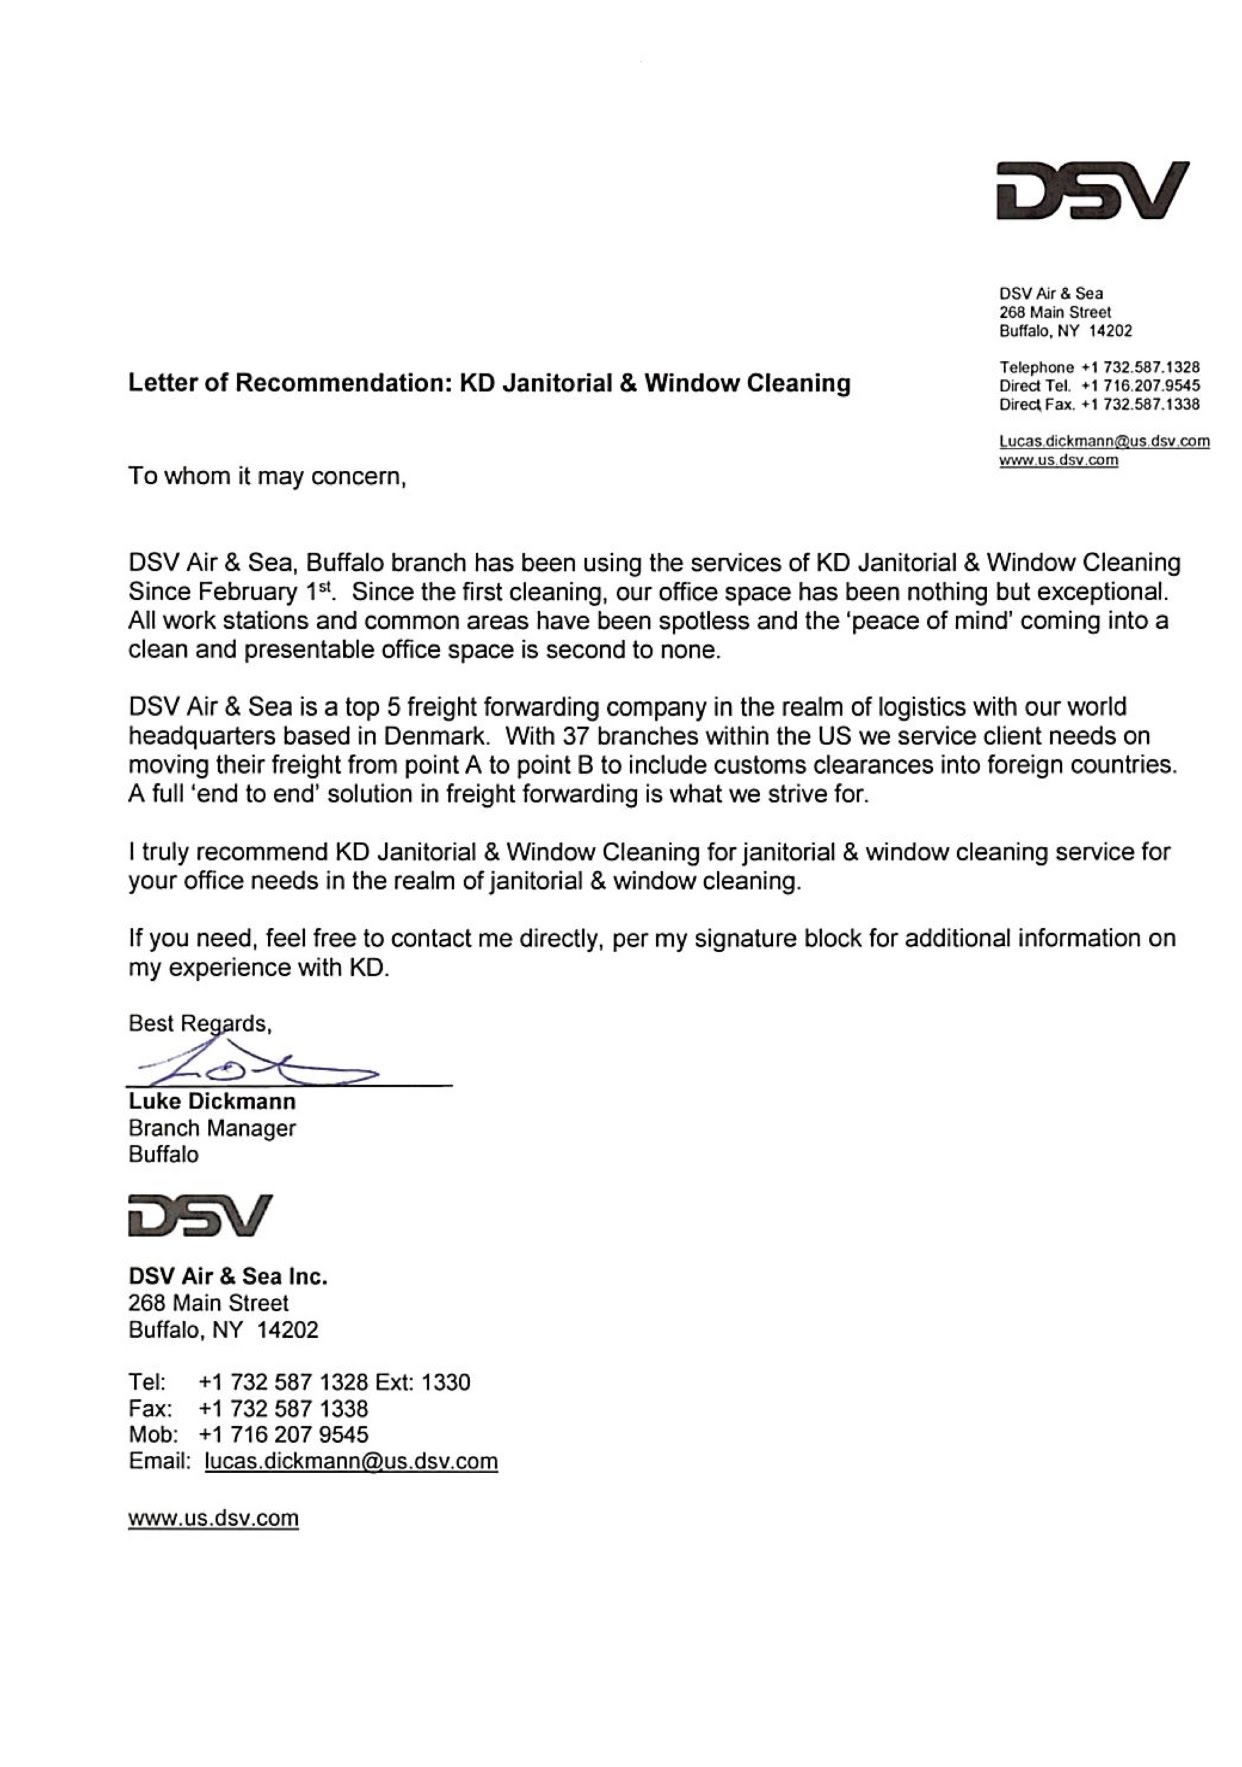 Letter Of Recommendation For Janitorial Services Akali within proportions 1242 X 1767